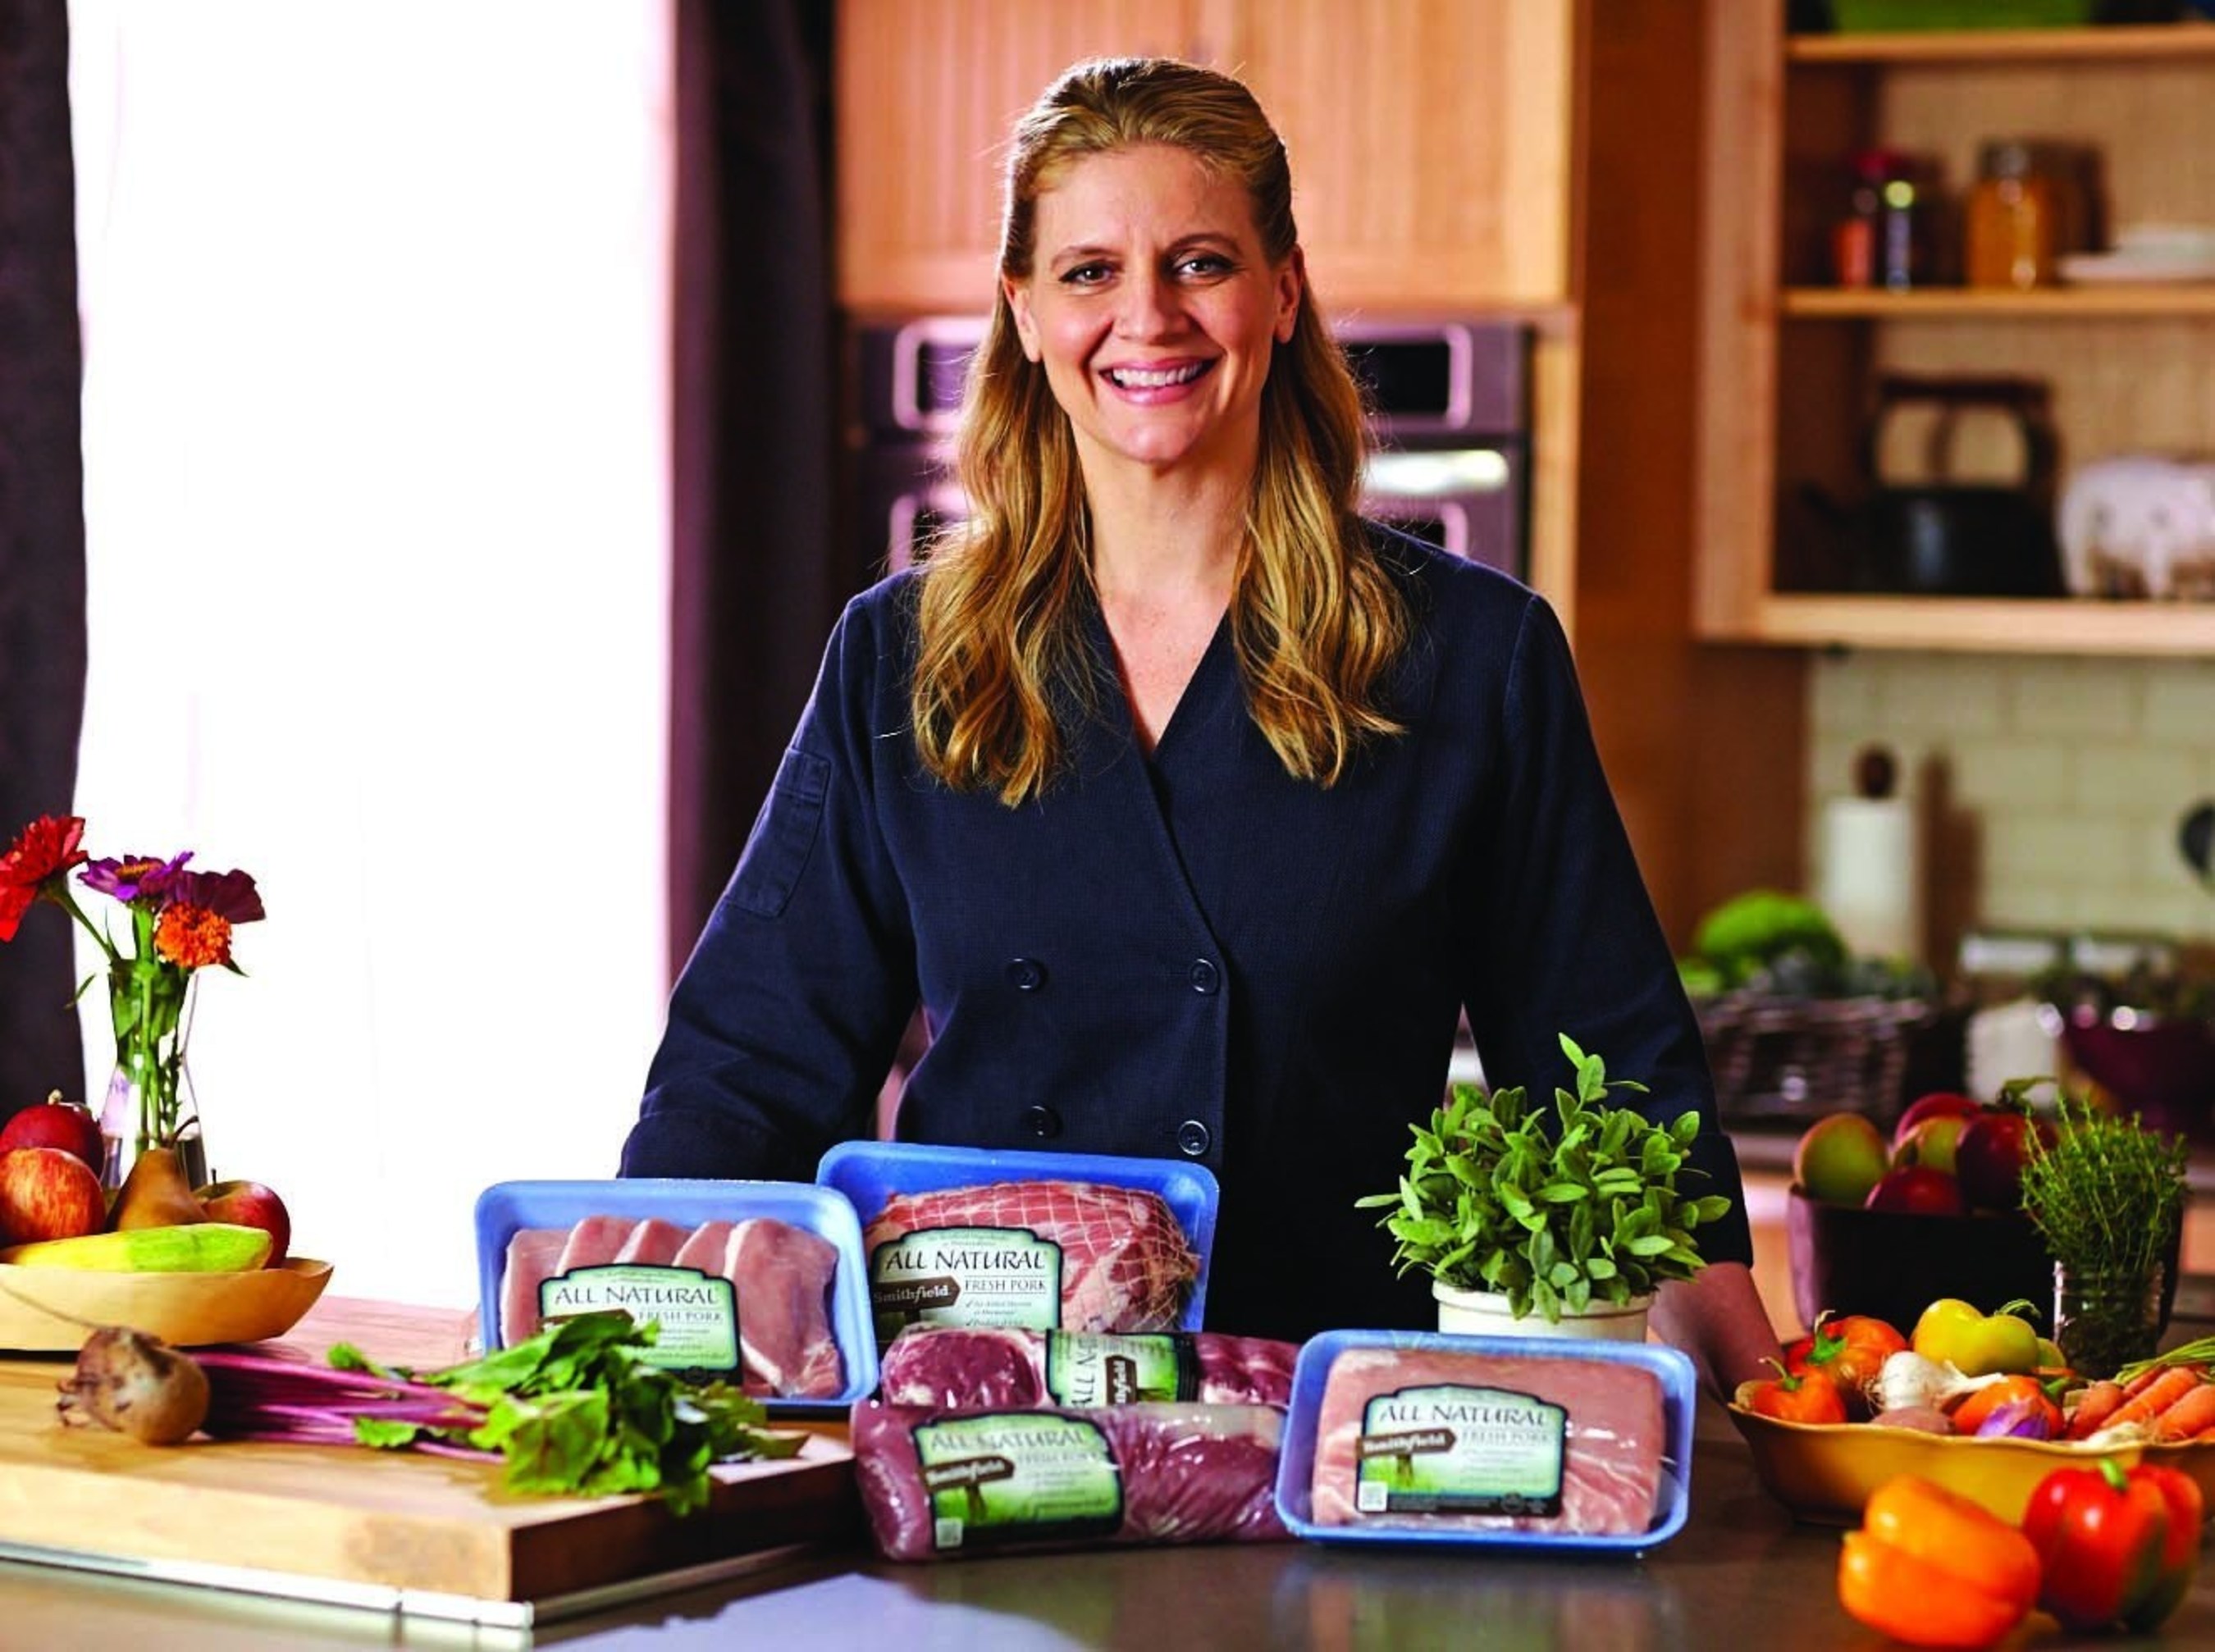 Smithfield Farmland partners with celebrity chef and restaurateur Amanda Freitag to introduce fresh new recipes and tips for cooking with Smithfield and Farmland branded All Natural Fresh Pork.